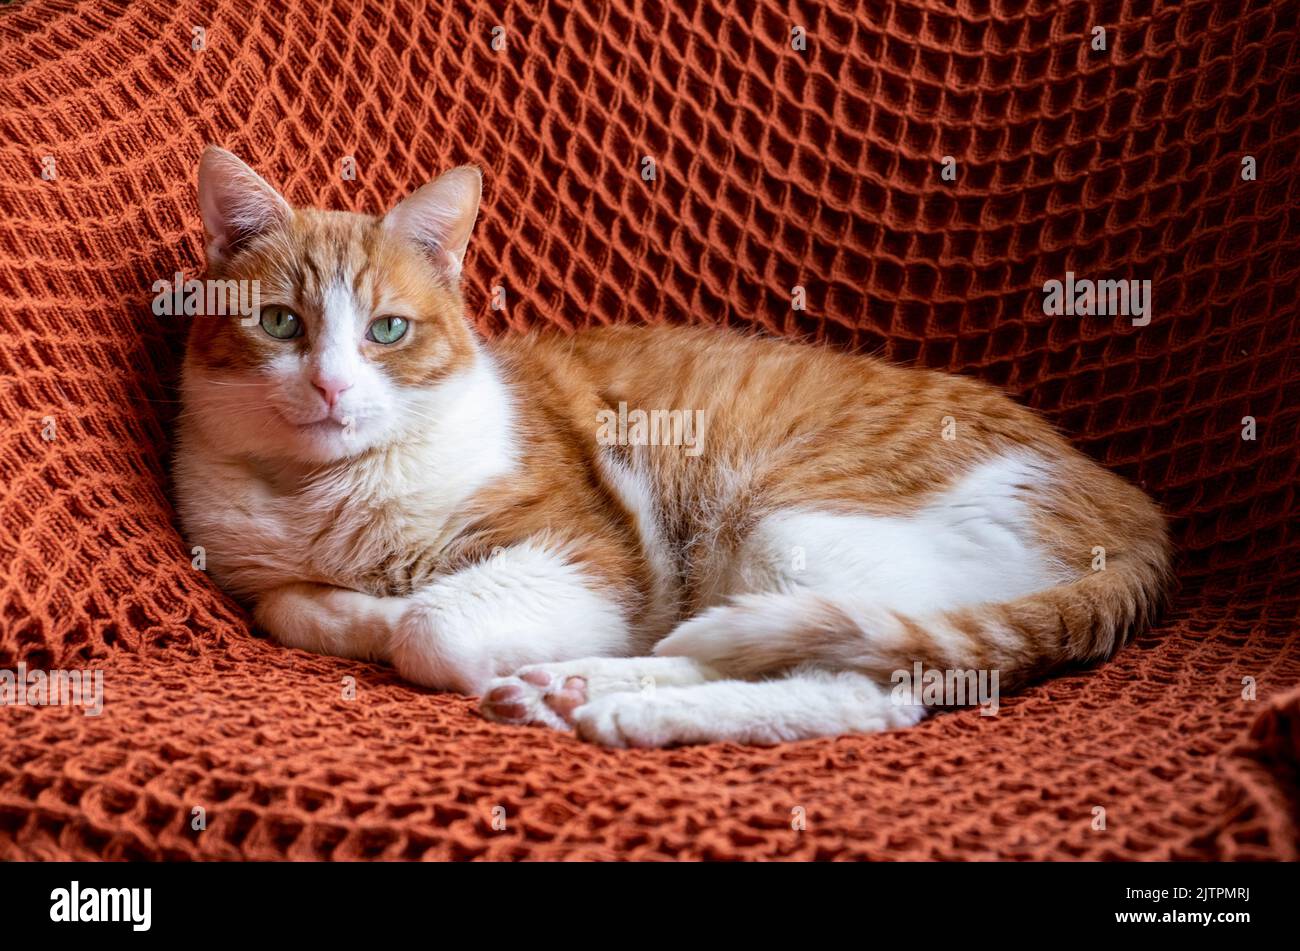 Adopted ginger and white tom cat with green eyes sitting on orange rug on chair Stock Photo